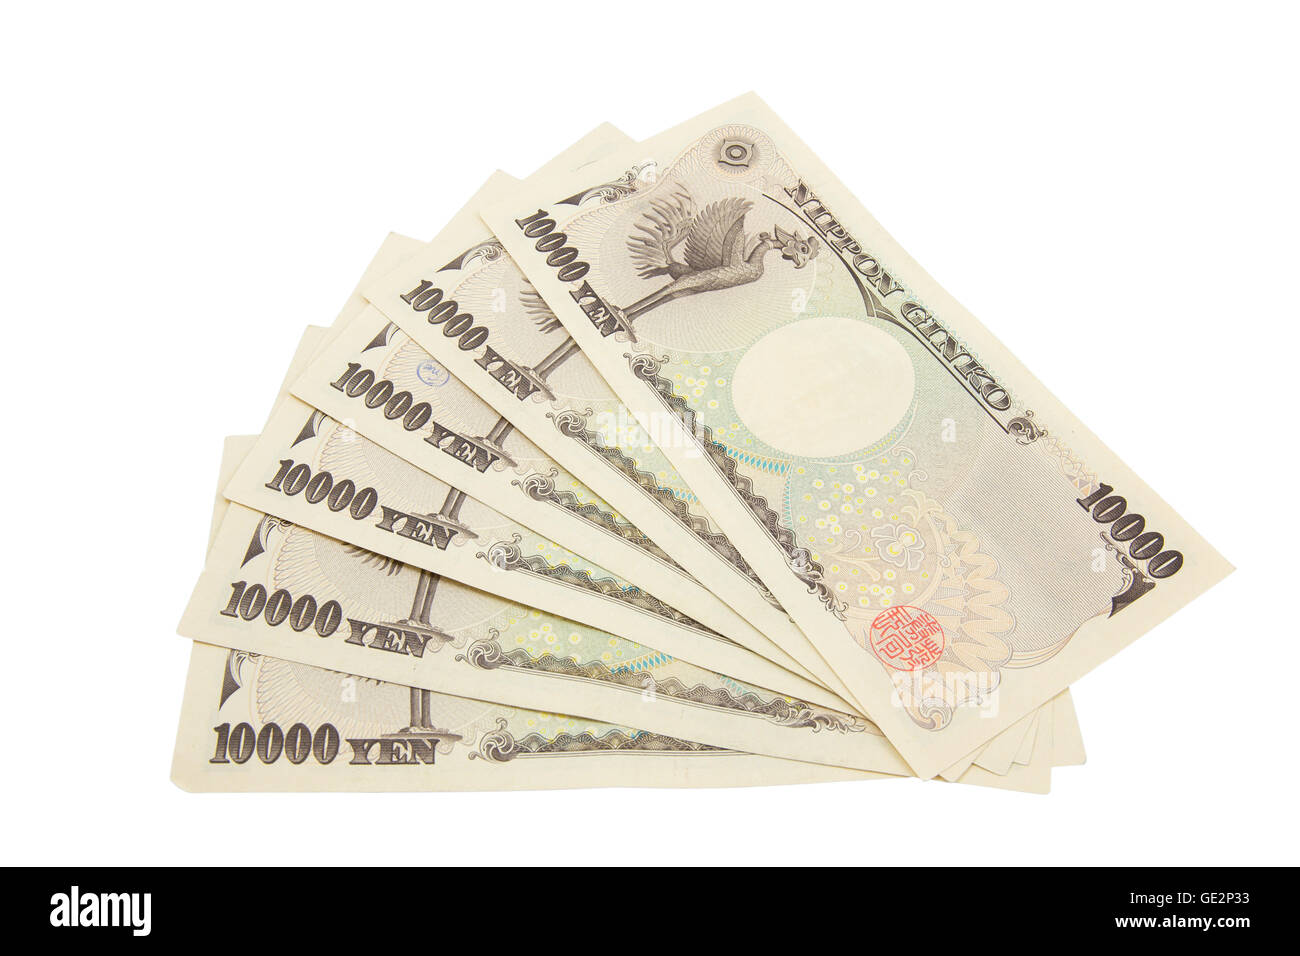 japanese yen notes. Currency of Japan on white background Stock Photo